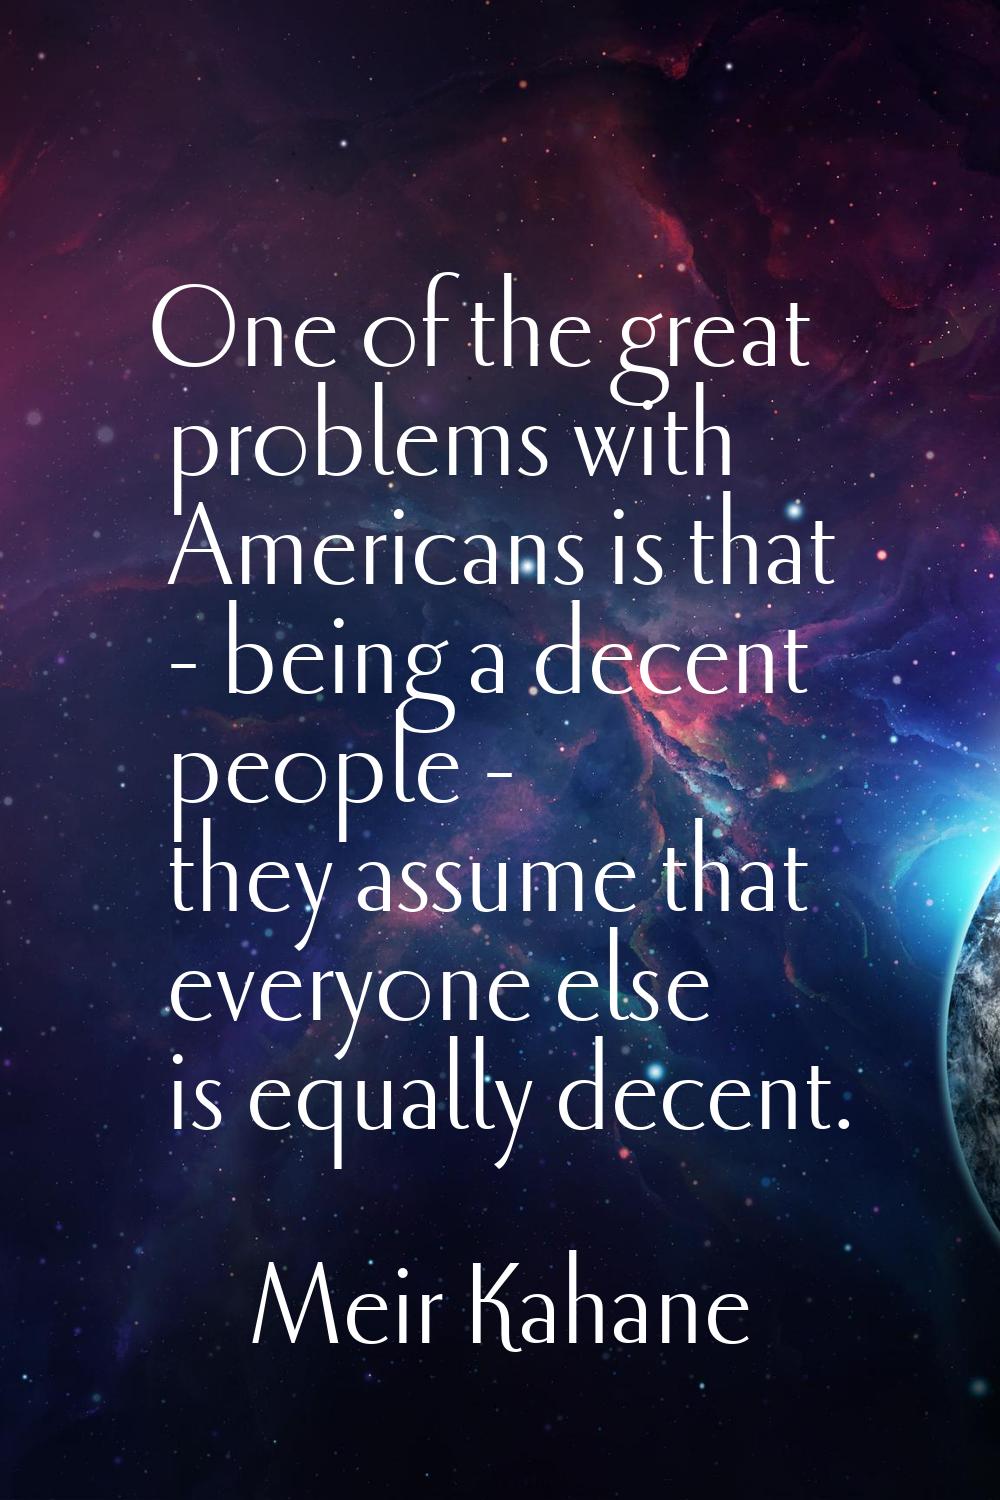 One of the great problems with Americans is that - being a decent people - they assume that everyon